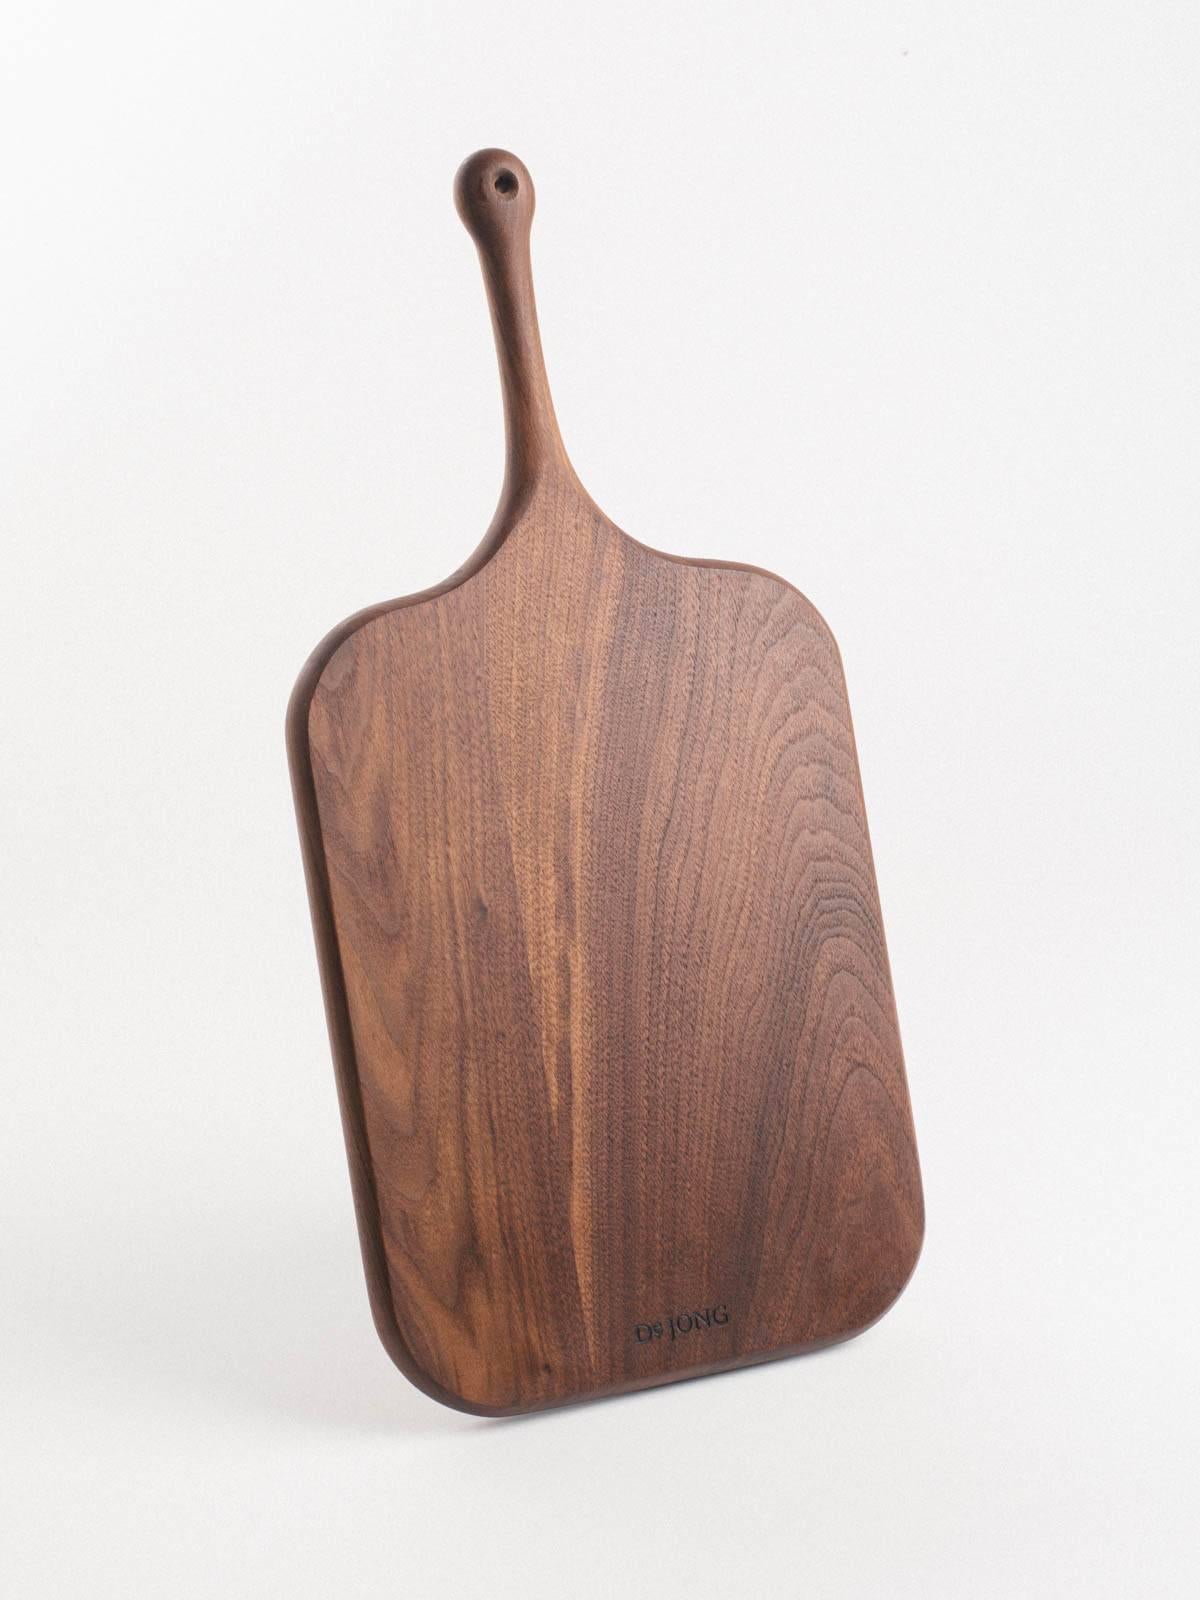 Our serving boards are elegantly shaped with a soft feel. Handles are ideally sized for the palm and include a leather bootlace hanging loop. Half-moon cut-outs serve as a second handle or to direct chopped fare. Each board is shaped, seasoned, and